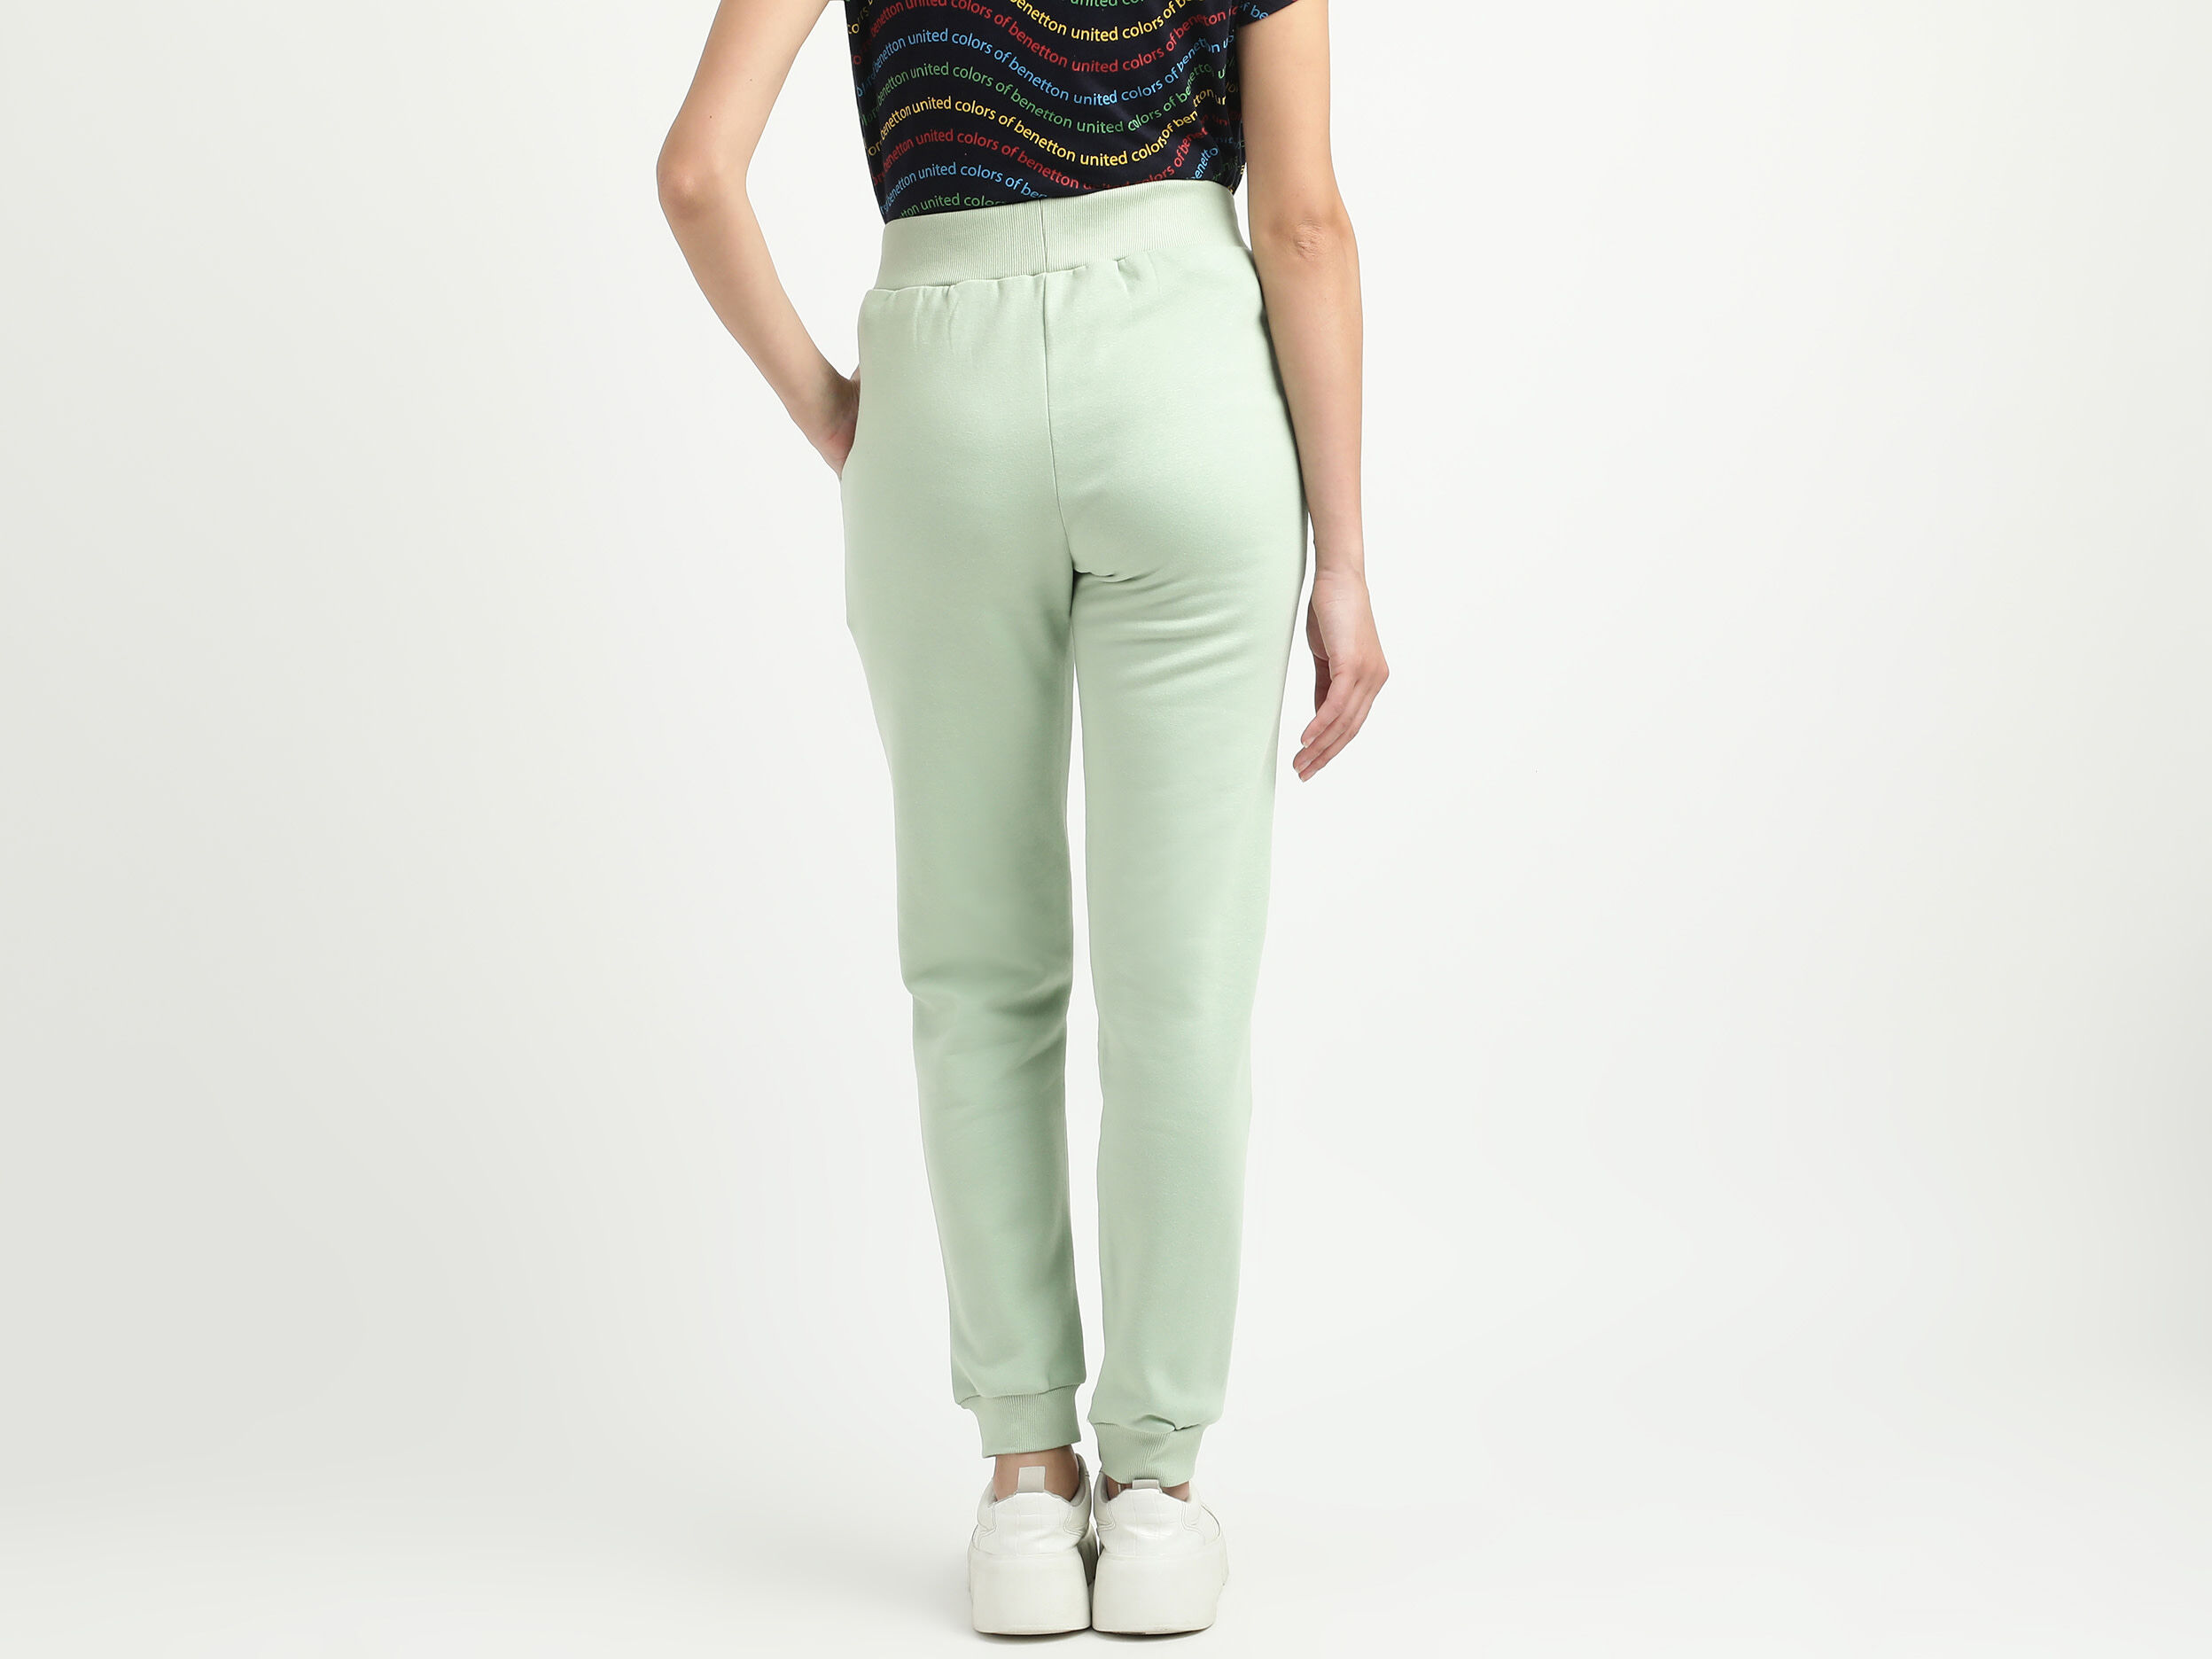 How to Wear Mint Green Colour | Mint green outfits, Mint green pants  outfit, Mint green pants